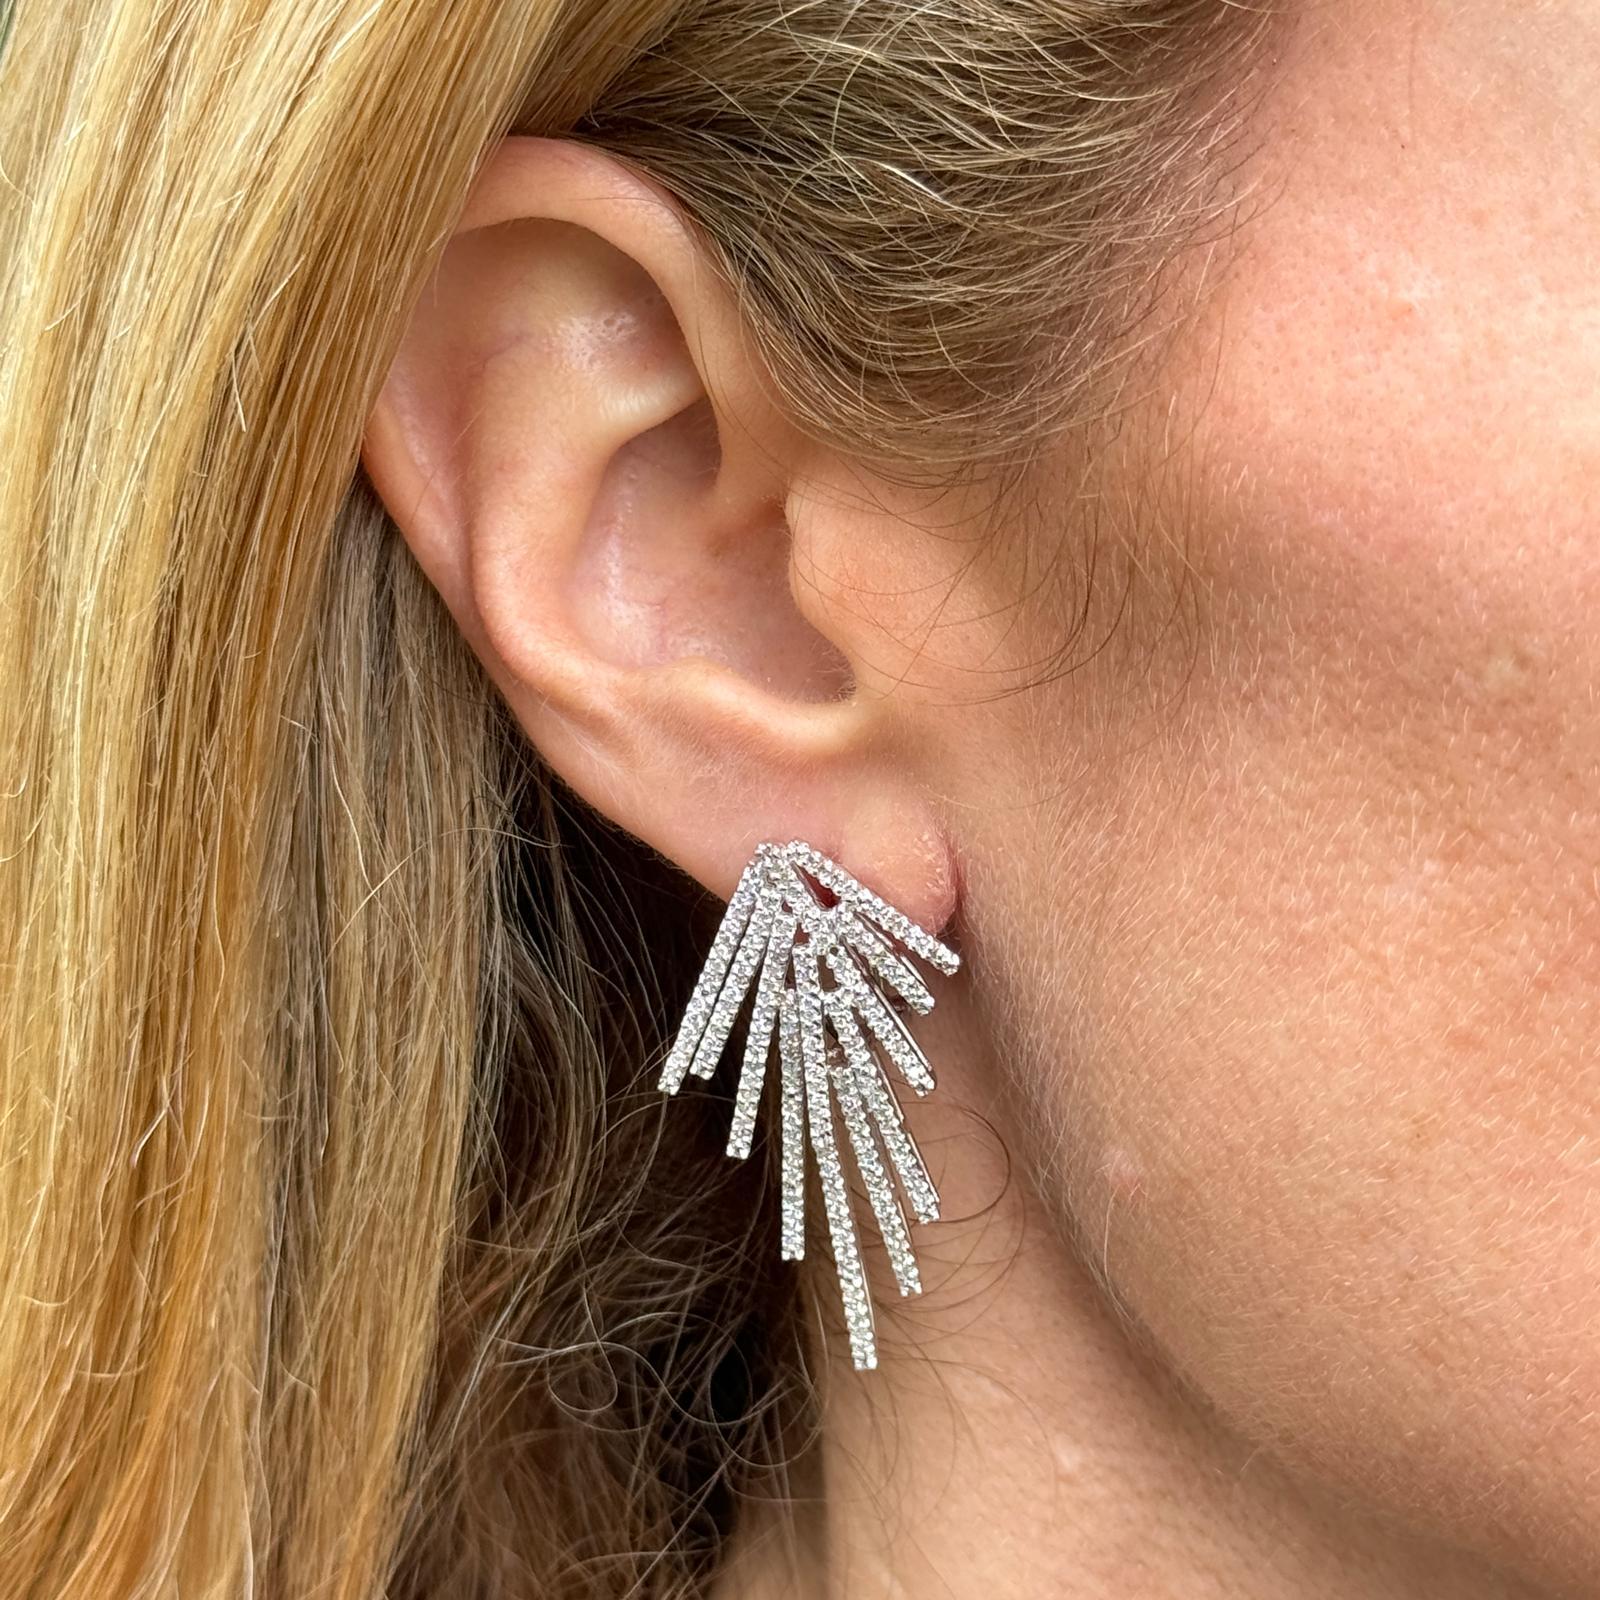 Modern diamond drop firework earrings crafted in 14 karat white gold. The earrings feature 298 single cut round diamonds weighing approximately 1.50 carat total weight. The diamonds are graded H-I color and SI clarity. The earrings measure 1.60